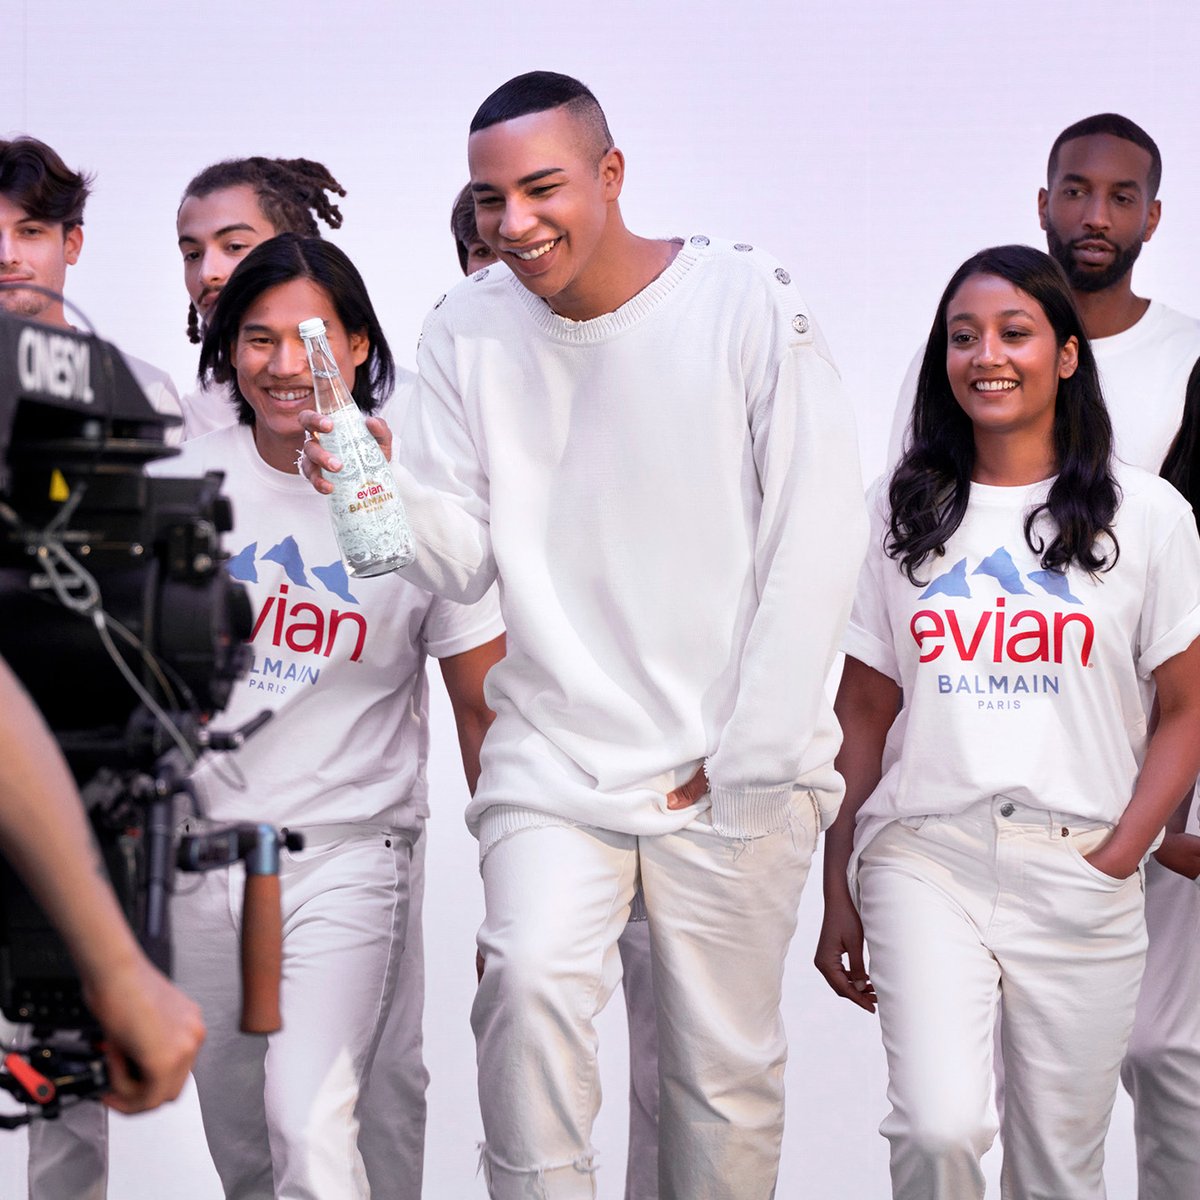 BALMAIN x EVIAN Behind the scenes of our new #BALMAINxEVIAN limited-edition campaign with @ORousteing 💧​ The Creative Director of the iconic fashion house @balmain reimagined our 75cl glass bottle taking inspiration from the universes of both French houses.​ ​#BALMAINxEVIAN